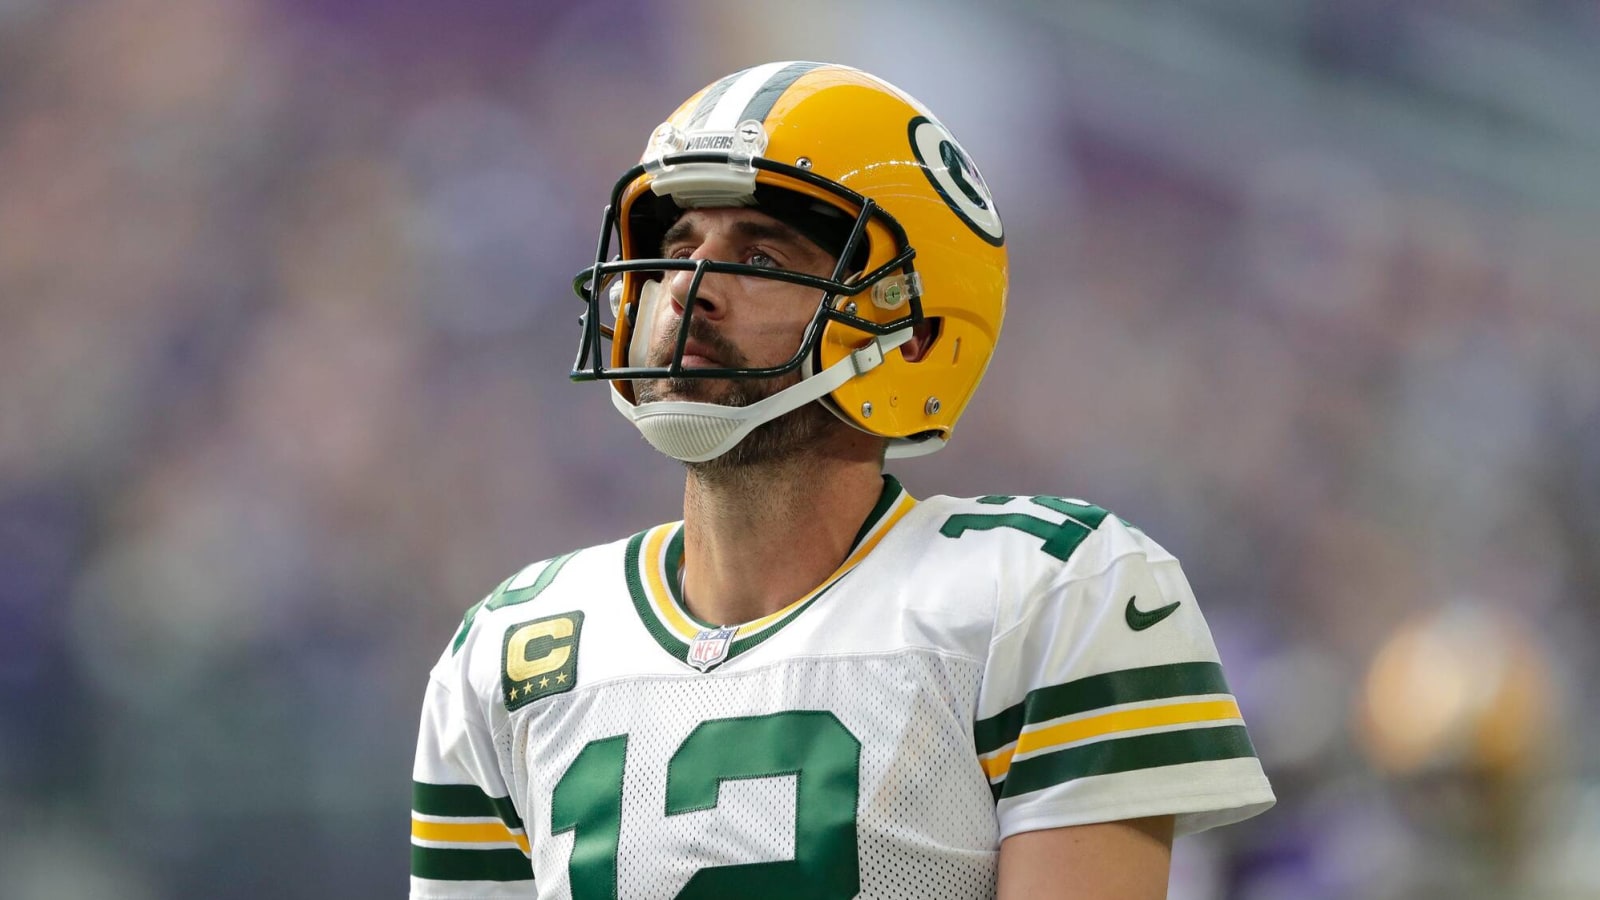 Aaron Rodgers swapping his number as he joins the Jets